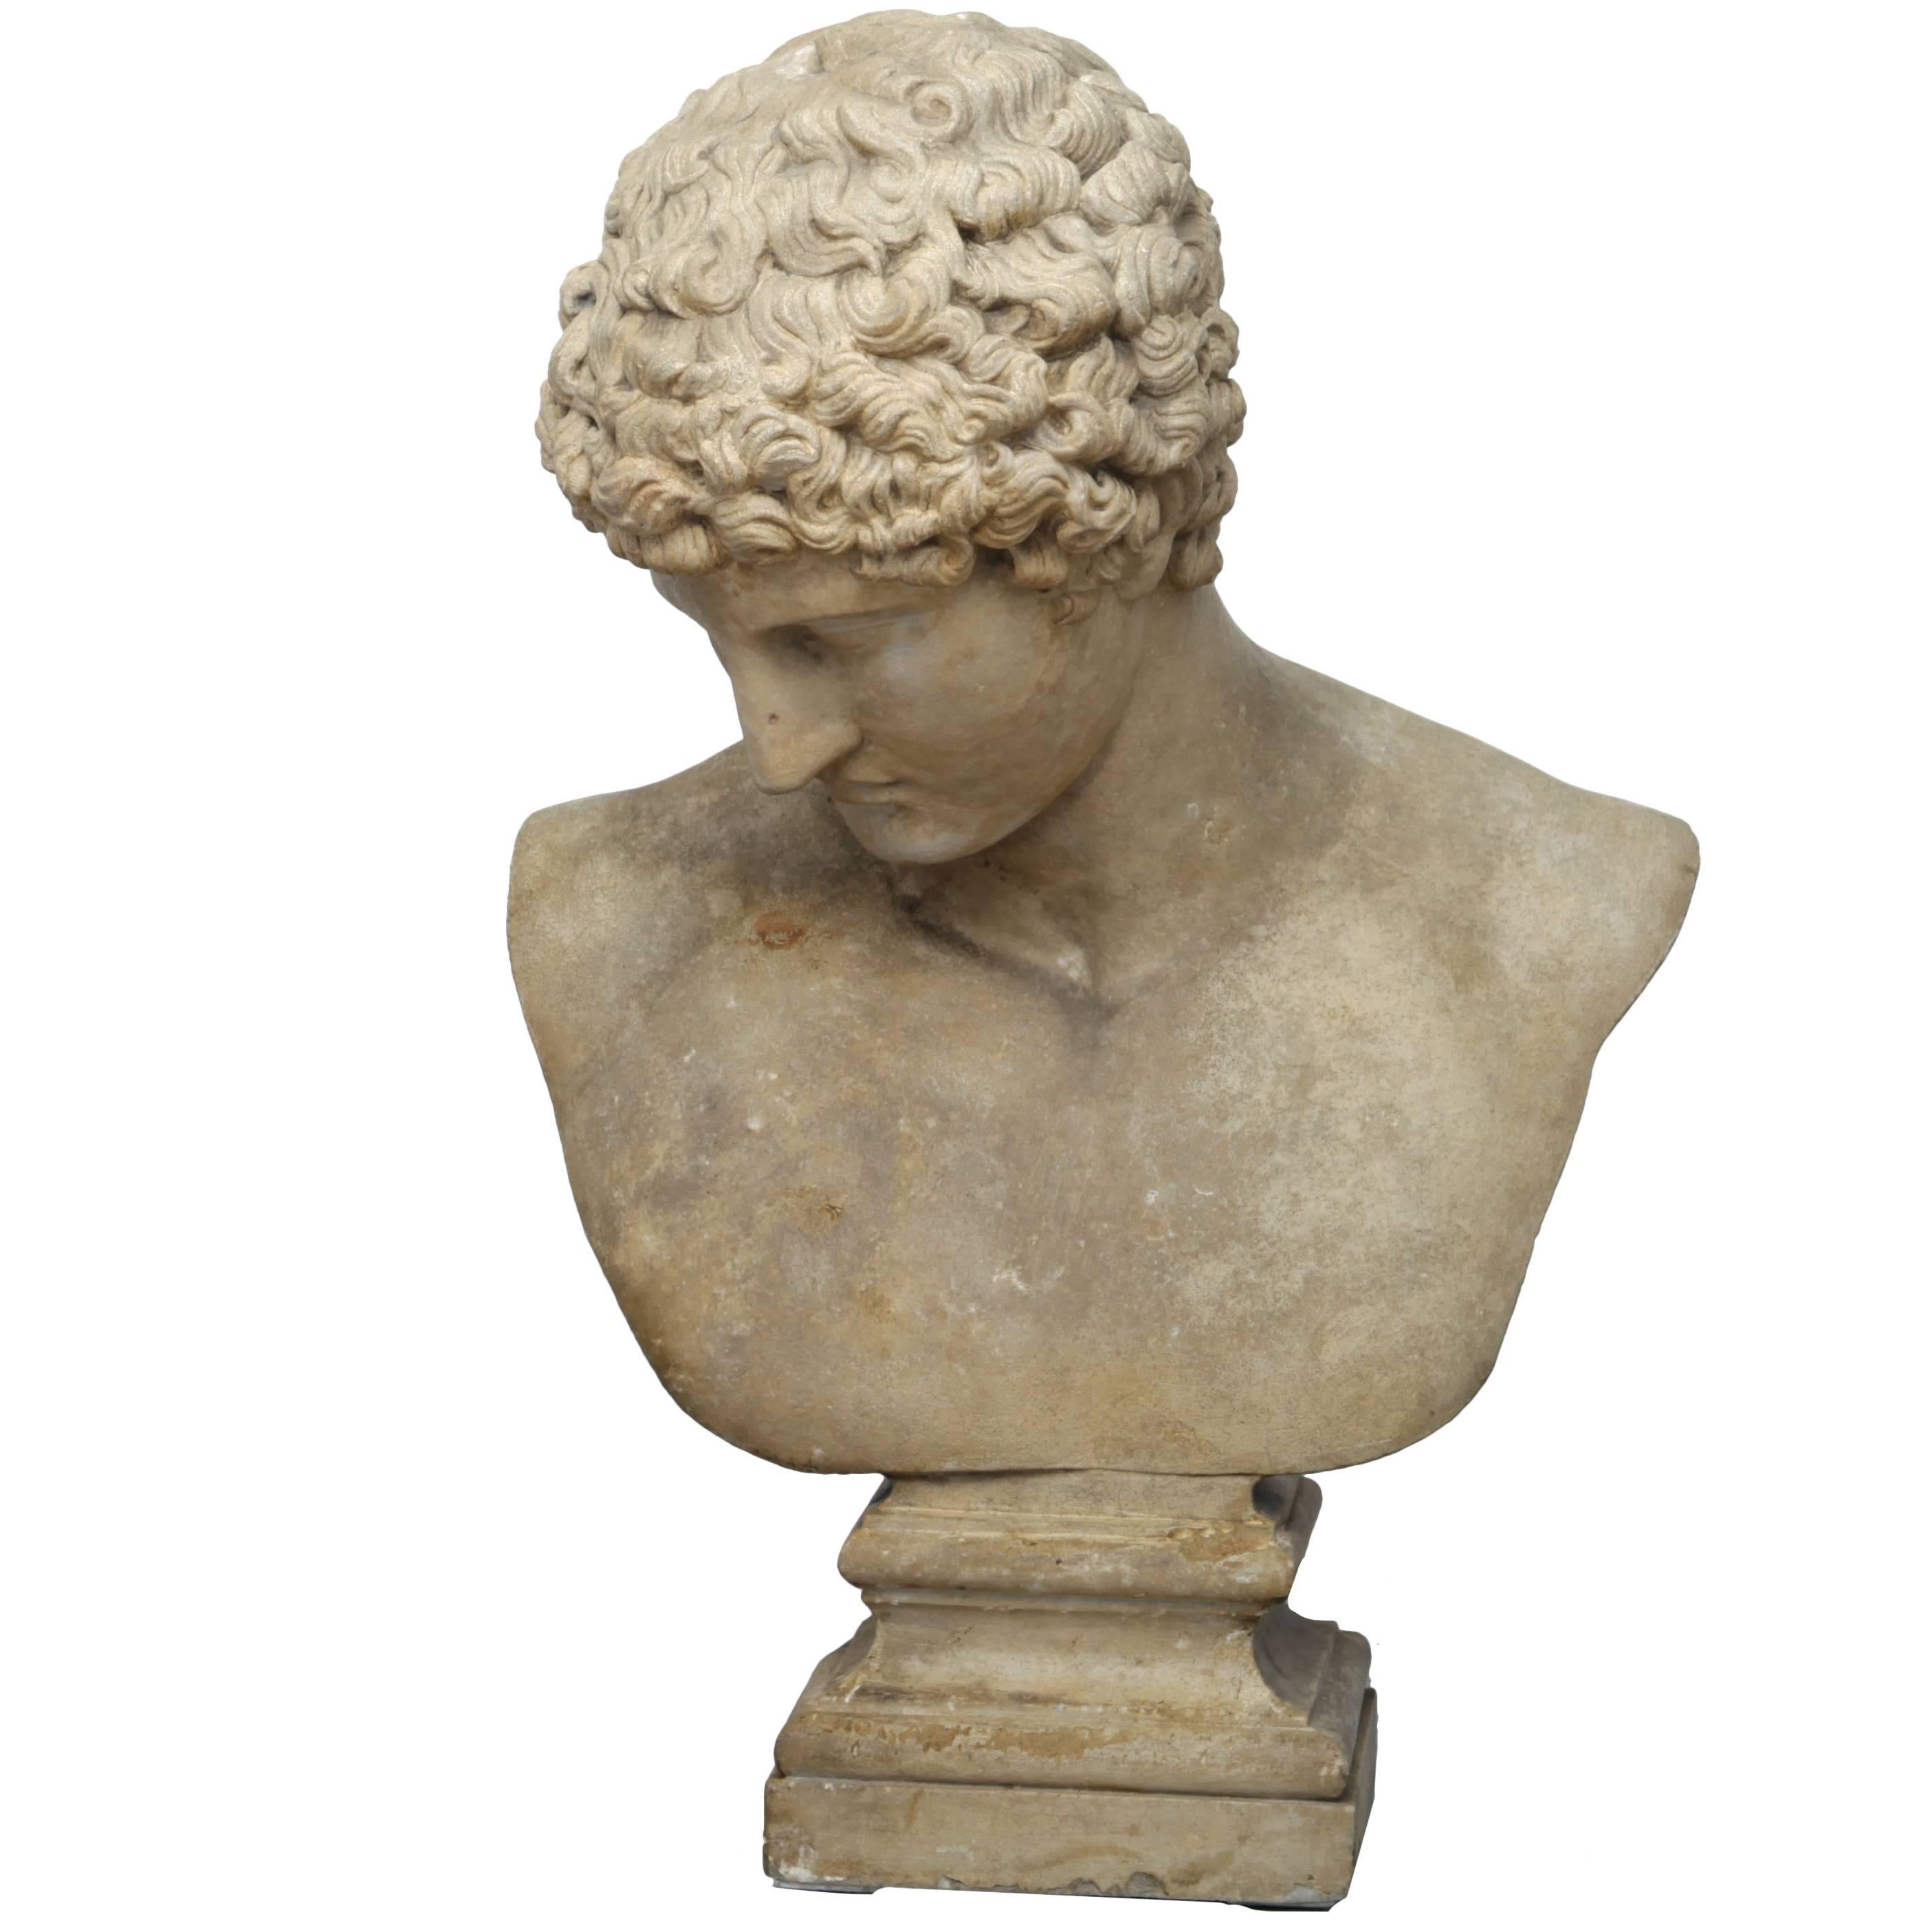 Copy of the Capitoline Antinous, 19th Century